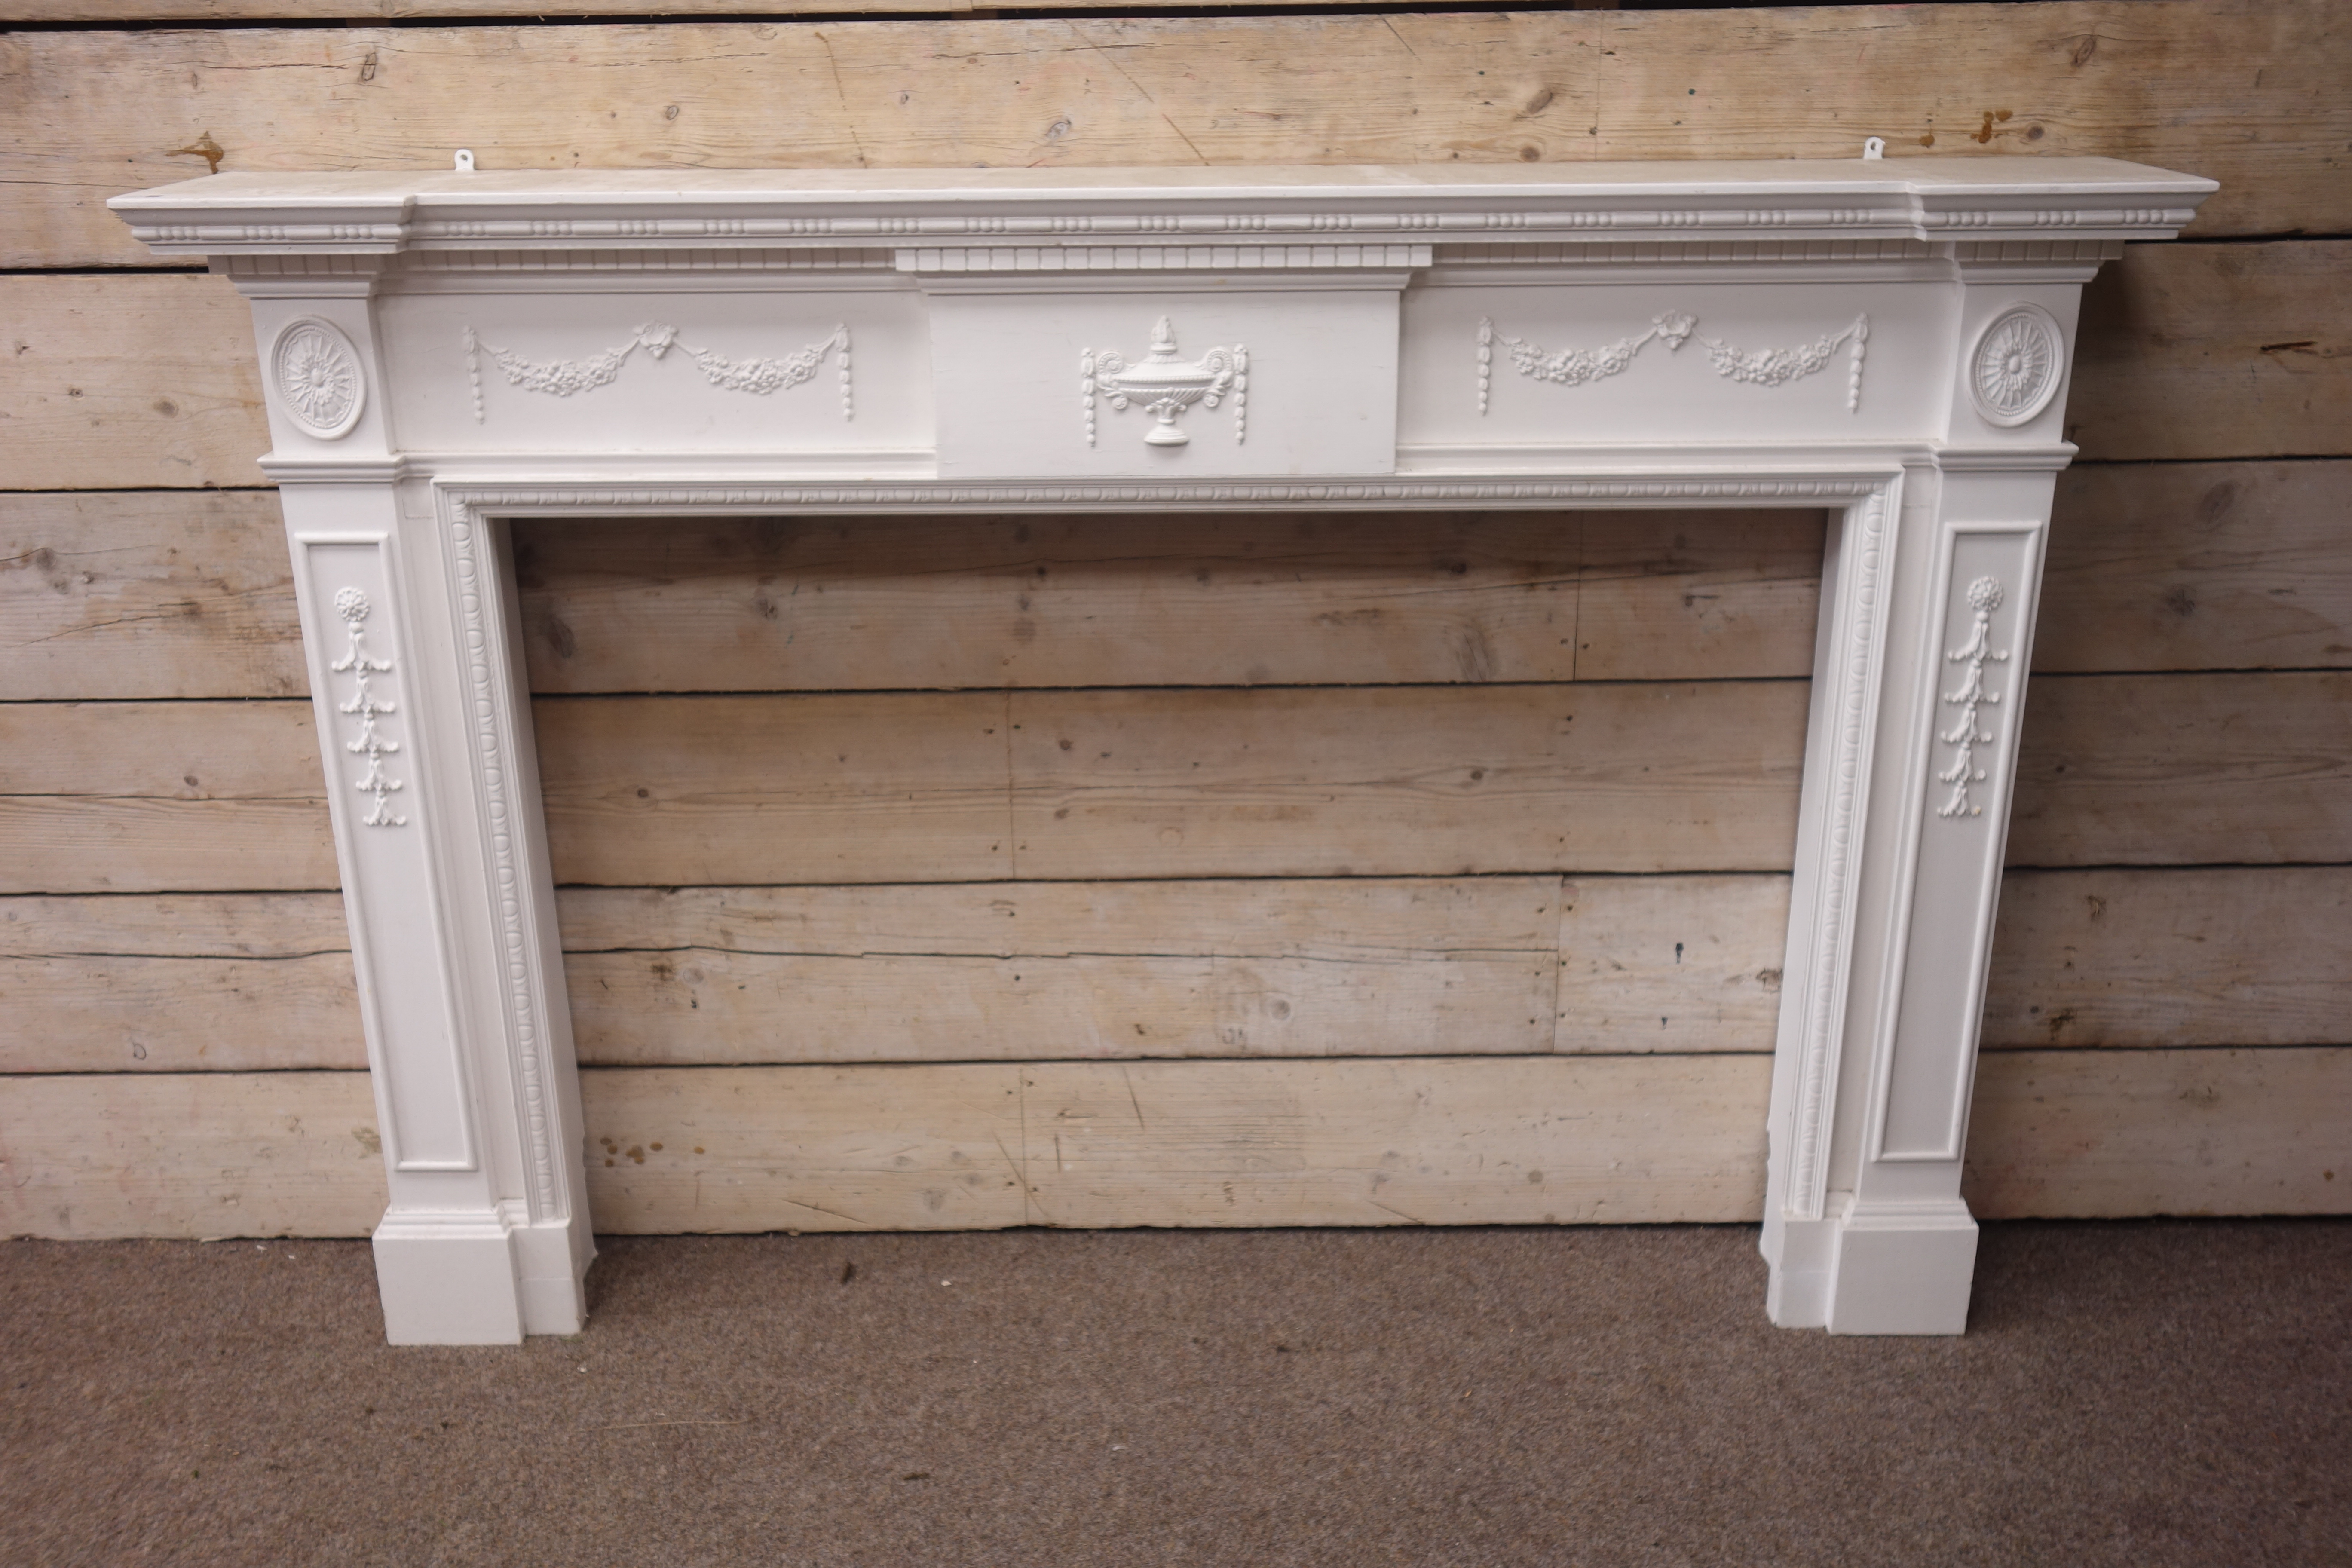 Large 20th century Adams style reverse breakfront fire surround, white painted wood,